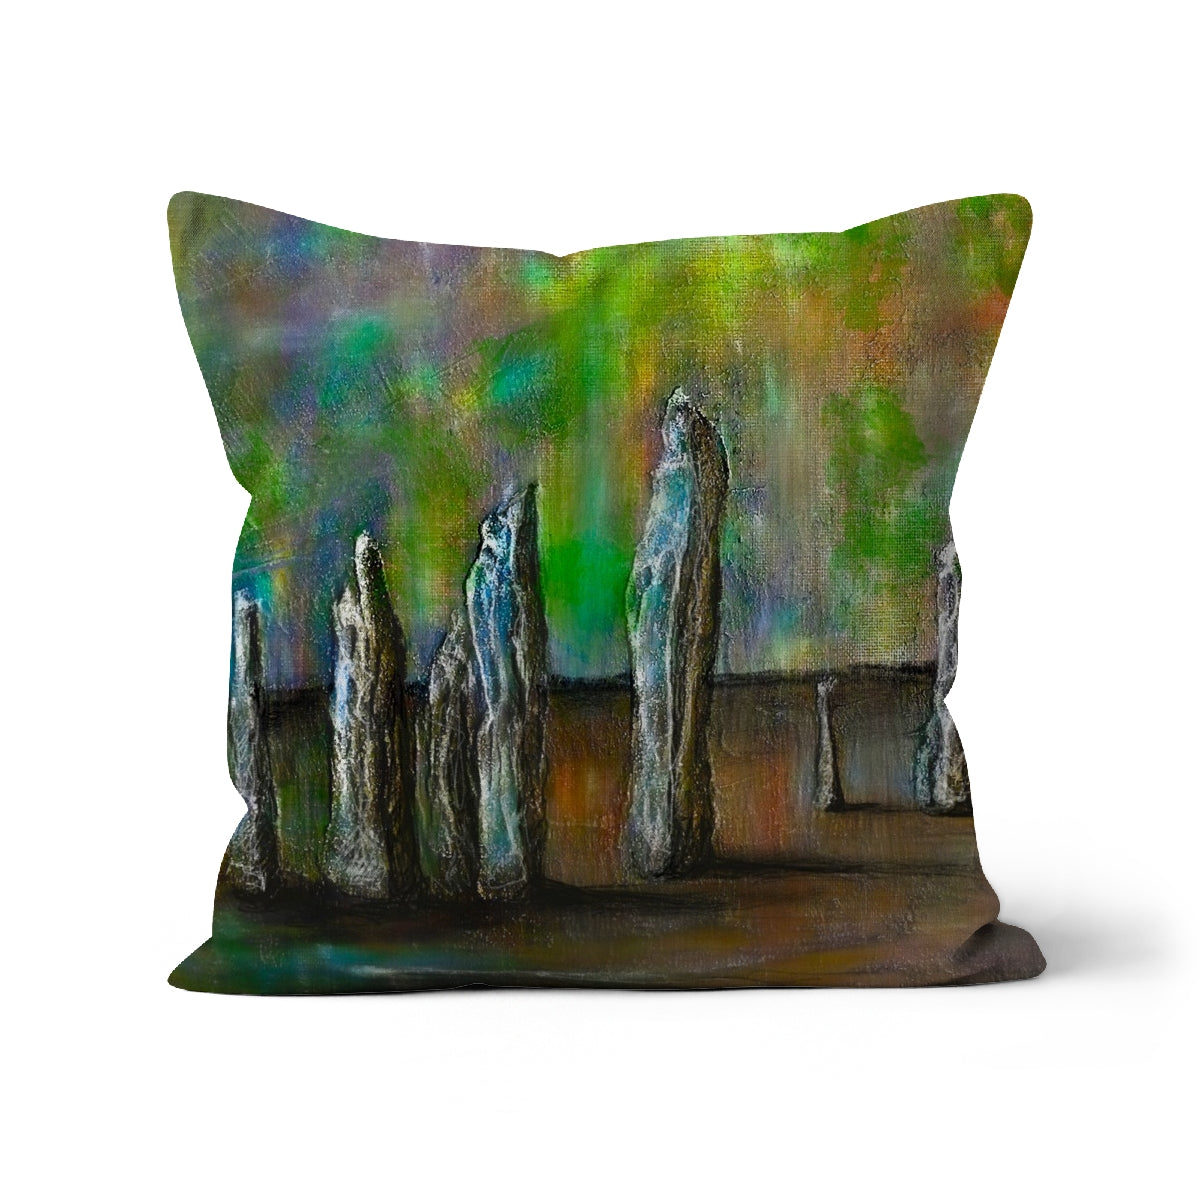 Callanish Northern Lights Art Gifts Cushion-Cushions-Hebridean Islands Art Gallery-Faux Suede-22"x22"-Paintings, Prints, Homeware, Art Gifts From Scotland By Scottish Artist Kevin Hunter